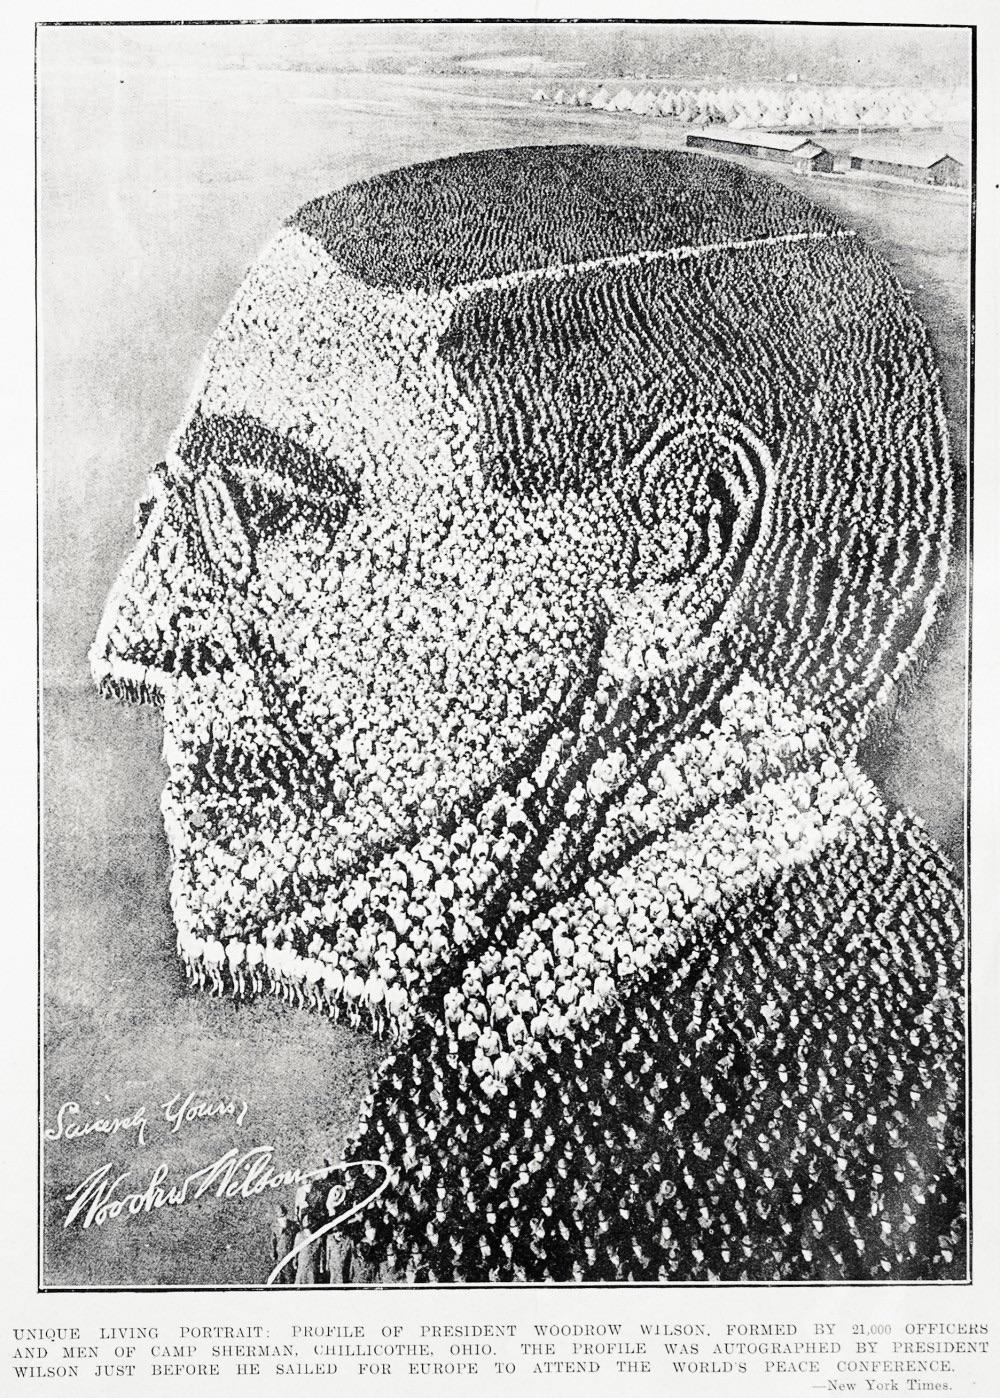 Unique living portrait: profile of President Woodrow Wilson, formed by 21,000 officers and men of Camp Sherman, Chillicothe, Ohio. 2 Feb 1919. Auckland Libraries Heritage Collections AWNS-19190206-33-4